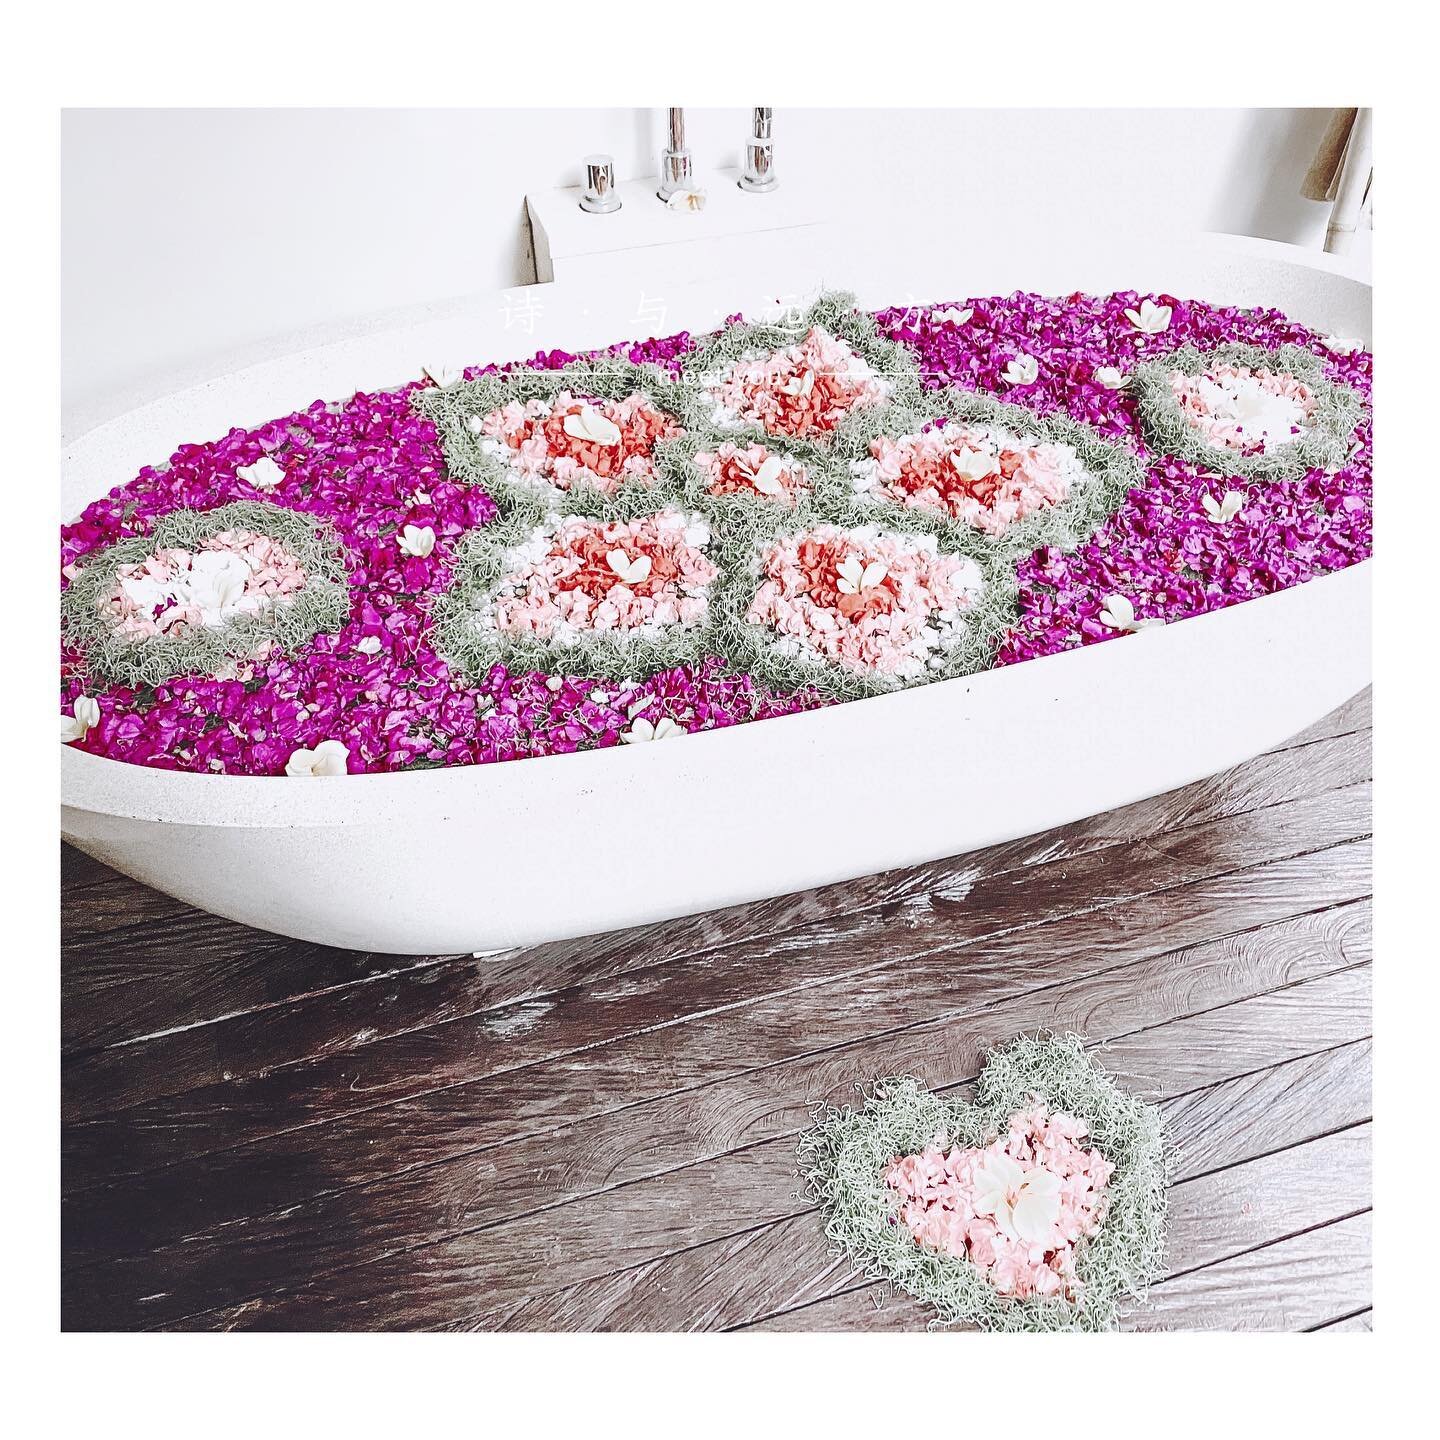 Sundays are for self care, I&rsquo;m currently wishing I was indulging in this beautiful flower bath again 🛀 was it even a visit to Bali if you didn&rsquo;t indulge in one of these slices of heaven?! 🌸